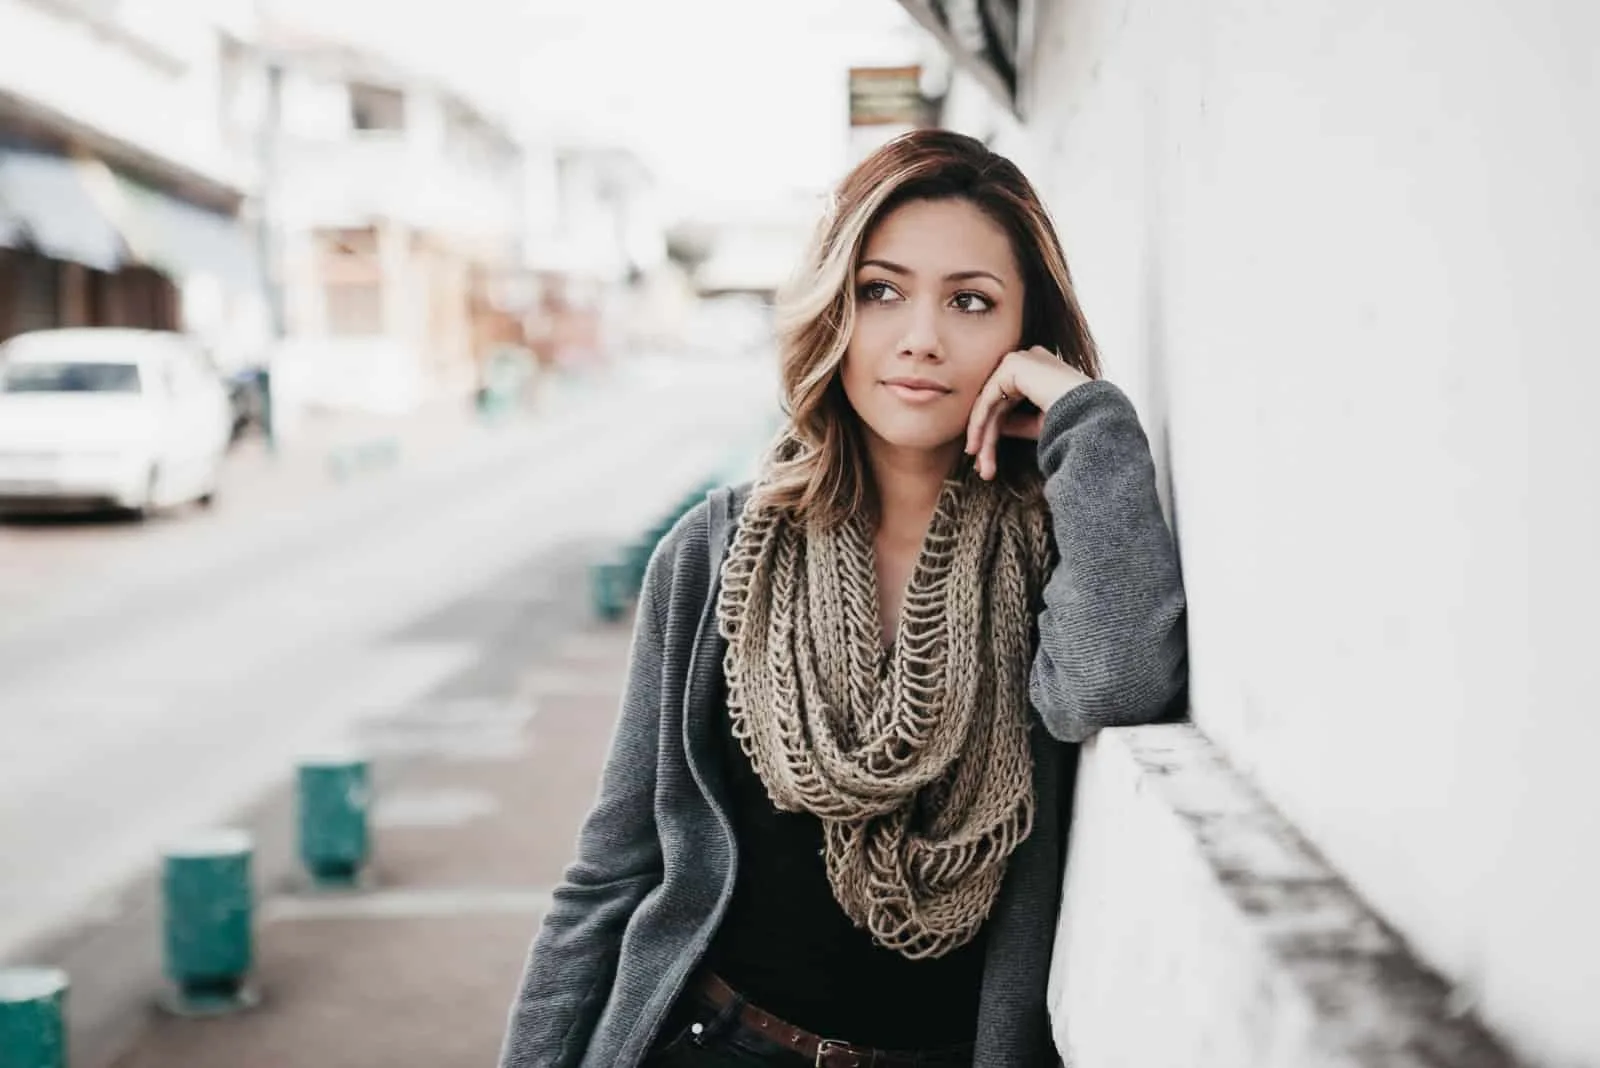 pensive woman with gray scarf leaning on wall